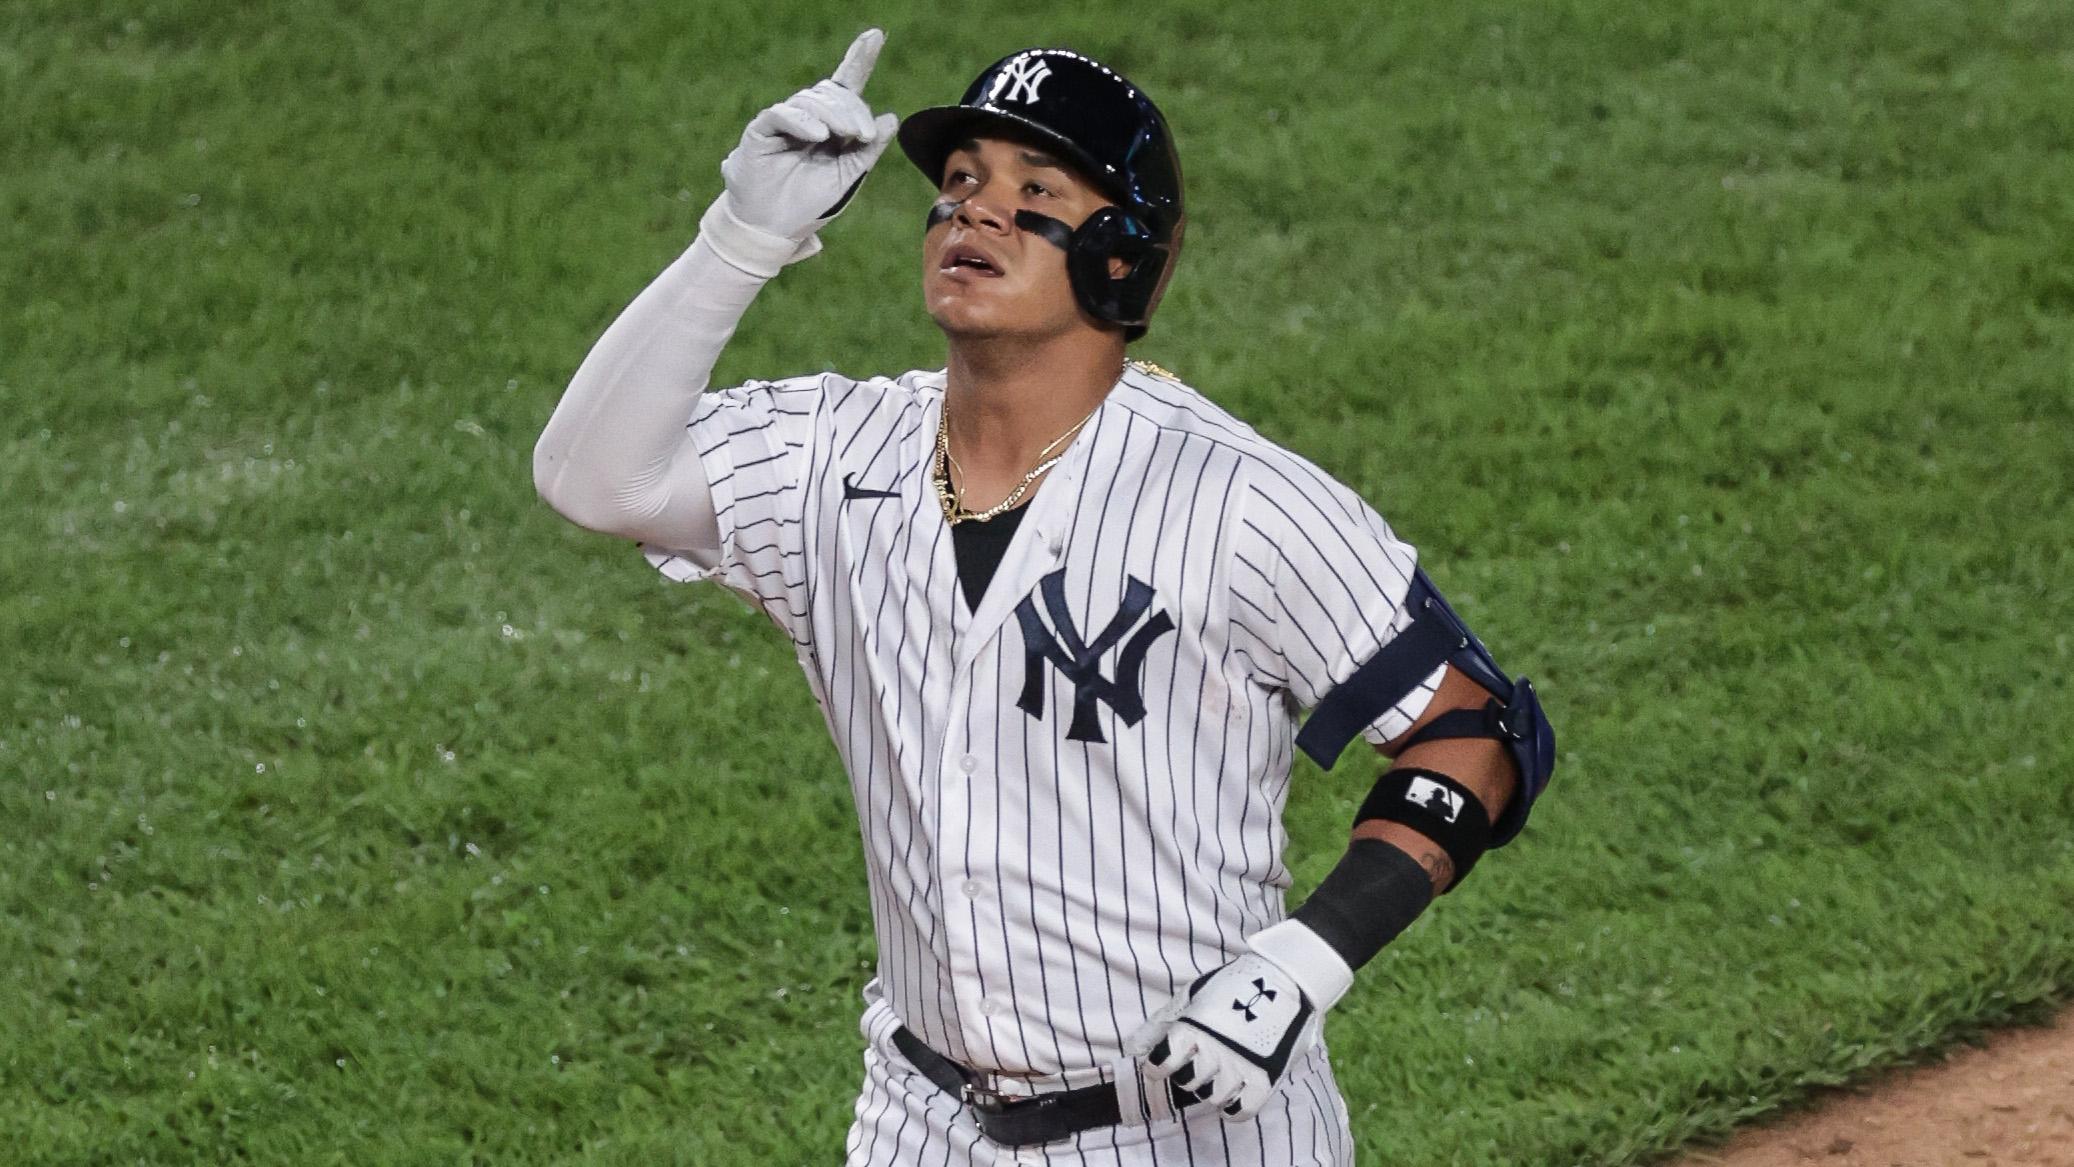 New York Yankees third base man Thairo Estrada (71) reacts after his solo home run during the fourth inning against the Boston Red Sox at Yankee Stadium. / Vincent Carchietta-USA TODAY Sports